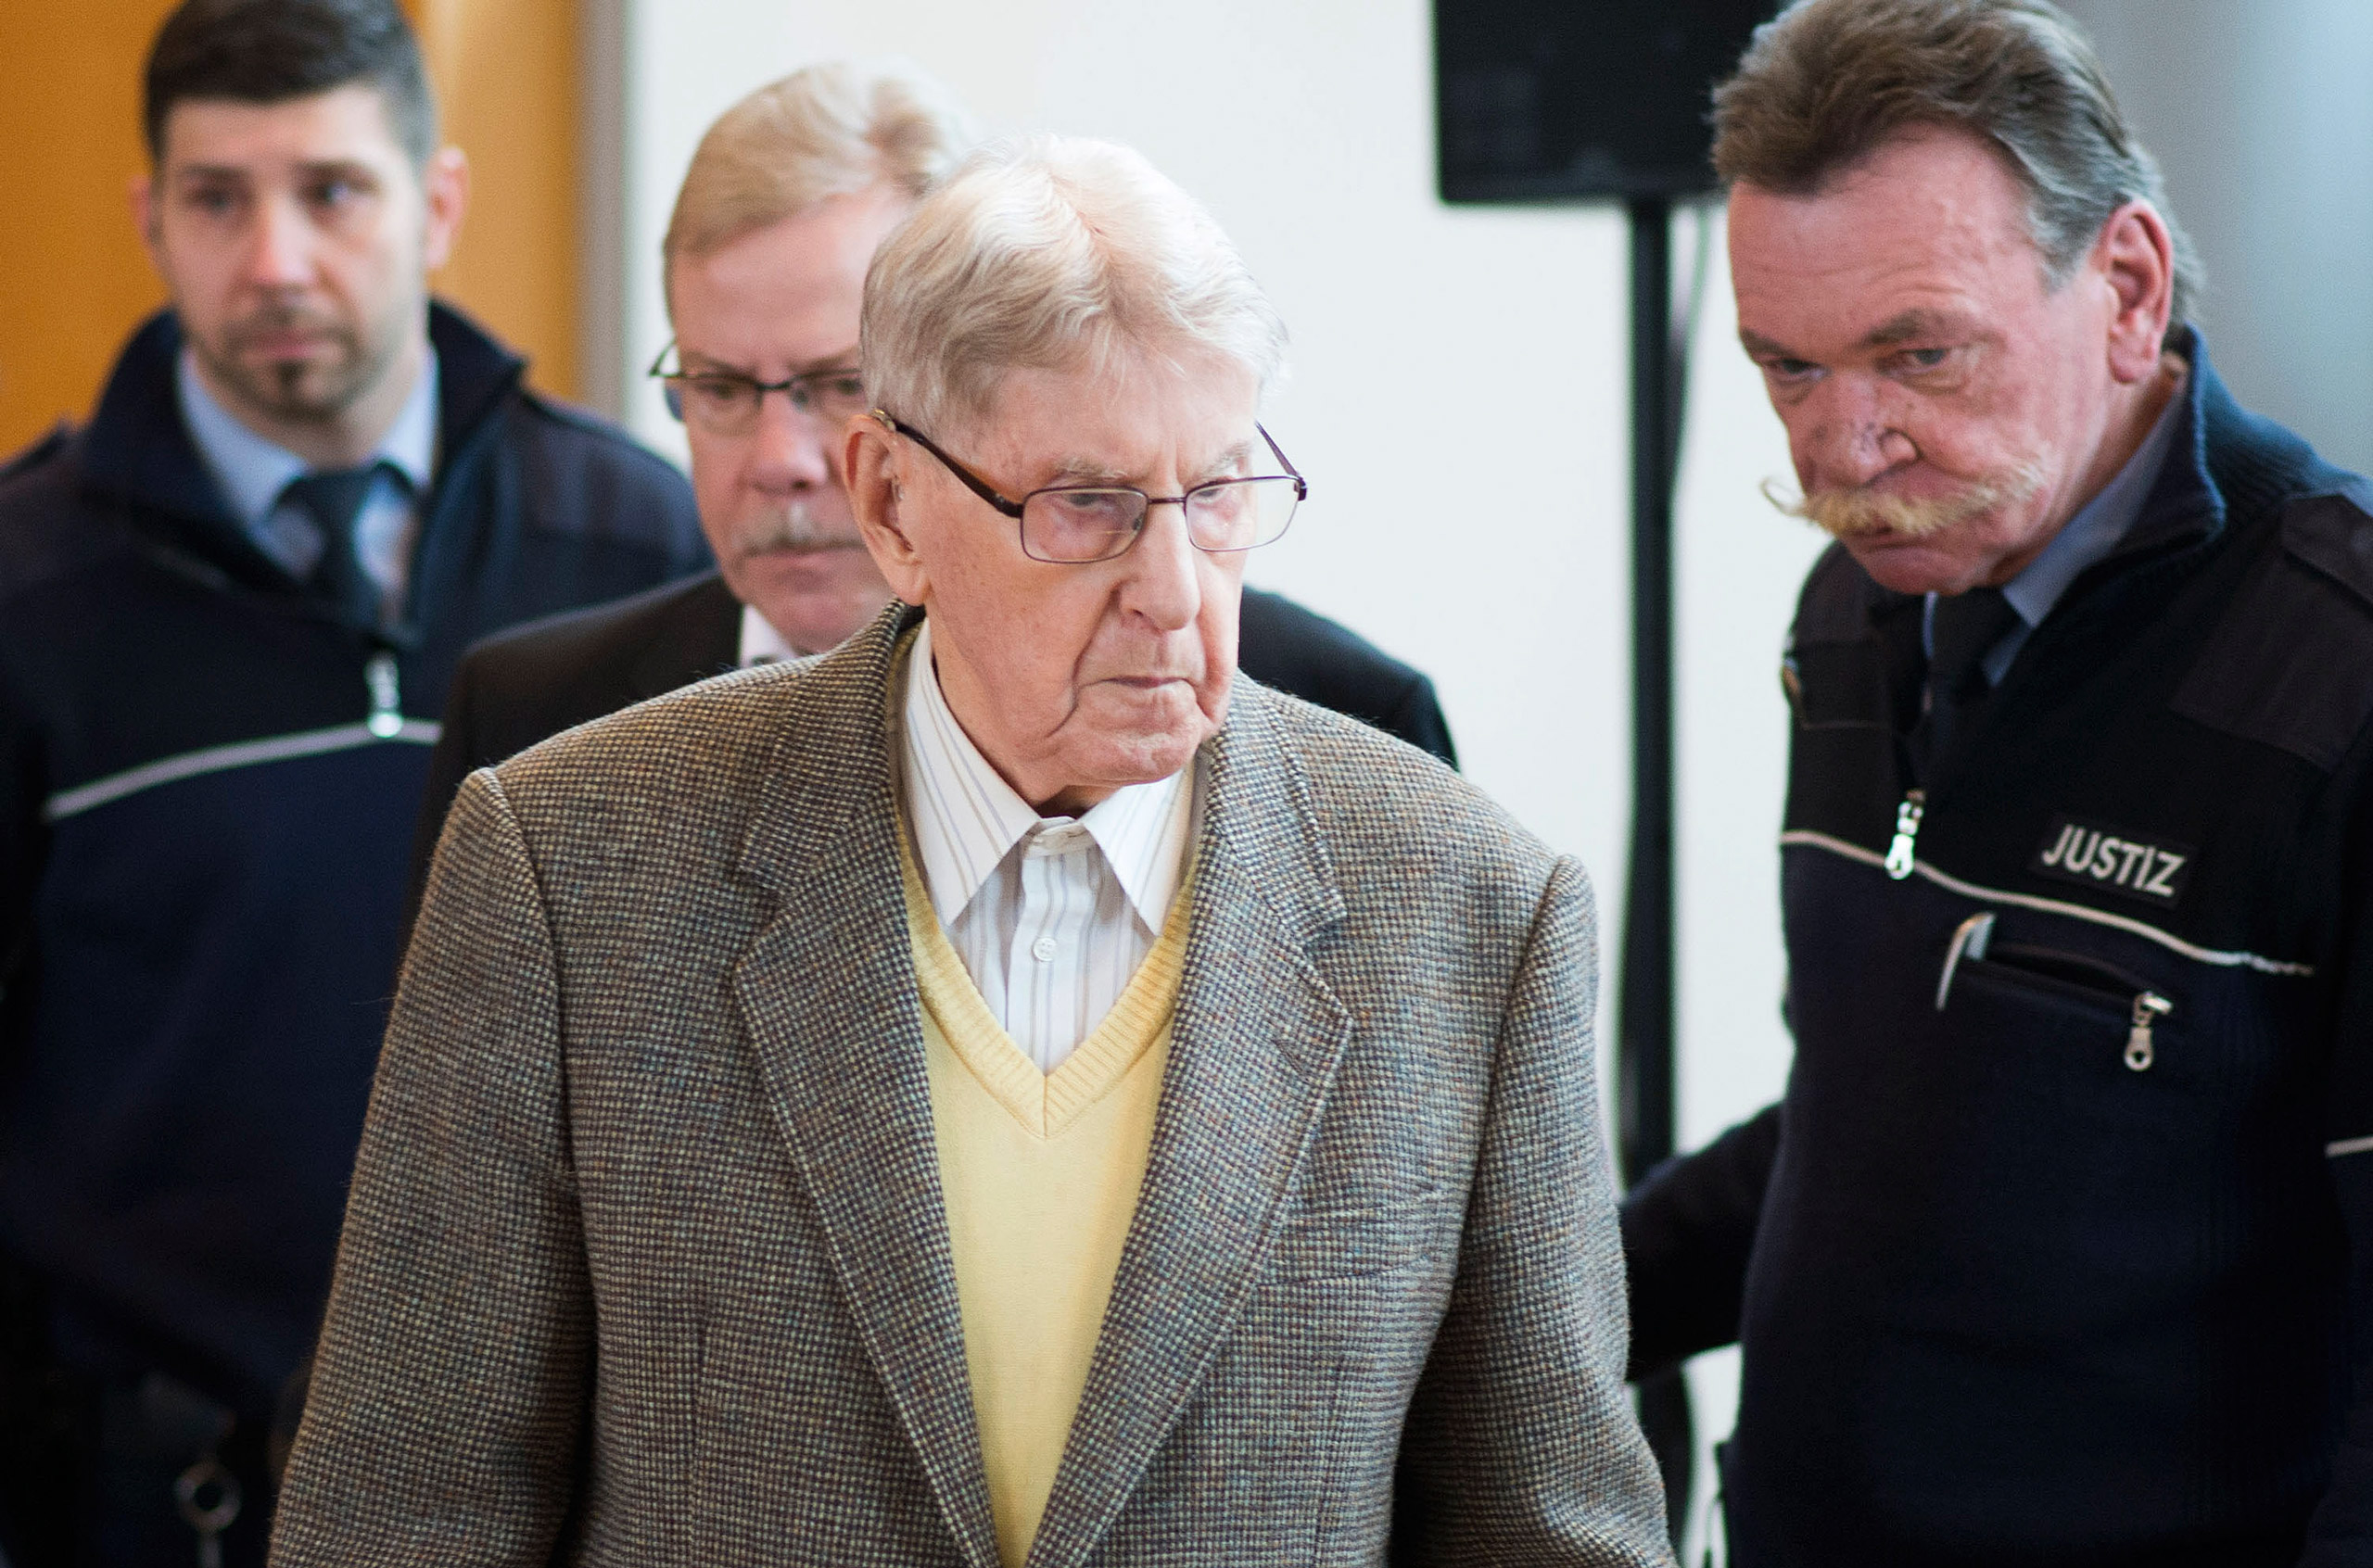 Reinhold Hanning, a 94-year-old former guard at Auschwitz, arrives in the courtroom before his trial in Detmold, Germany, on Feb. 12, 2016. (Bernd Thissen—Reuters)